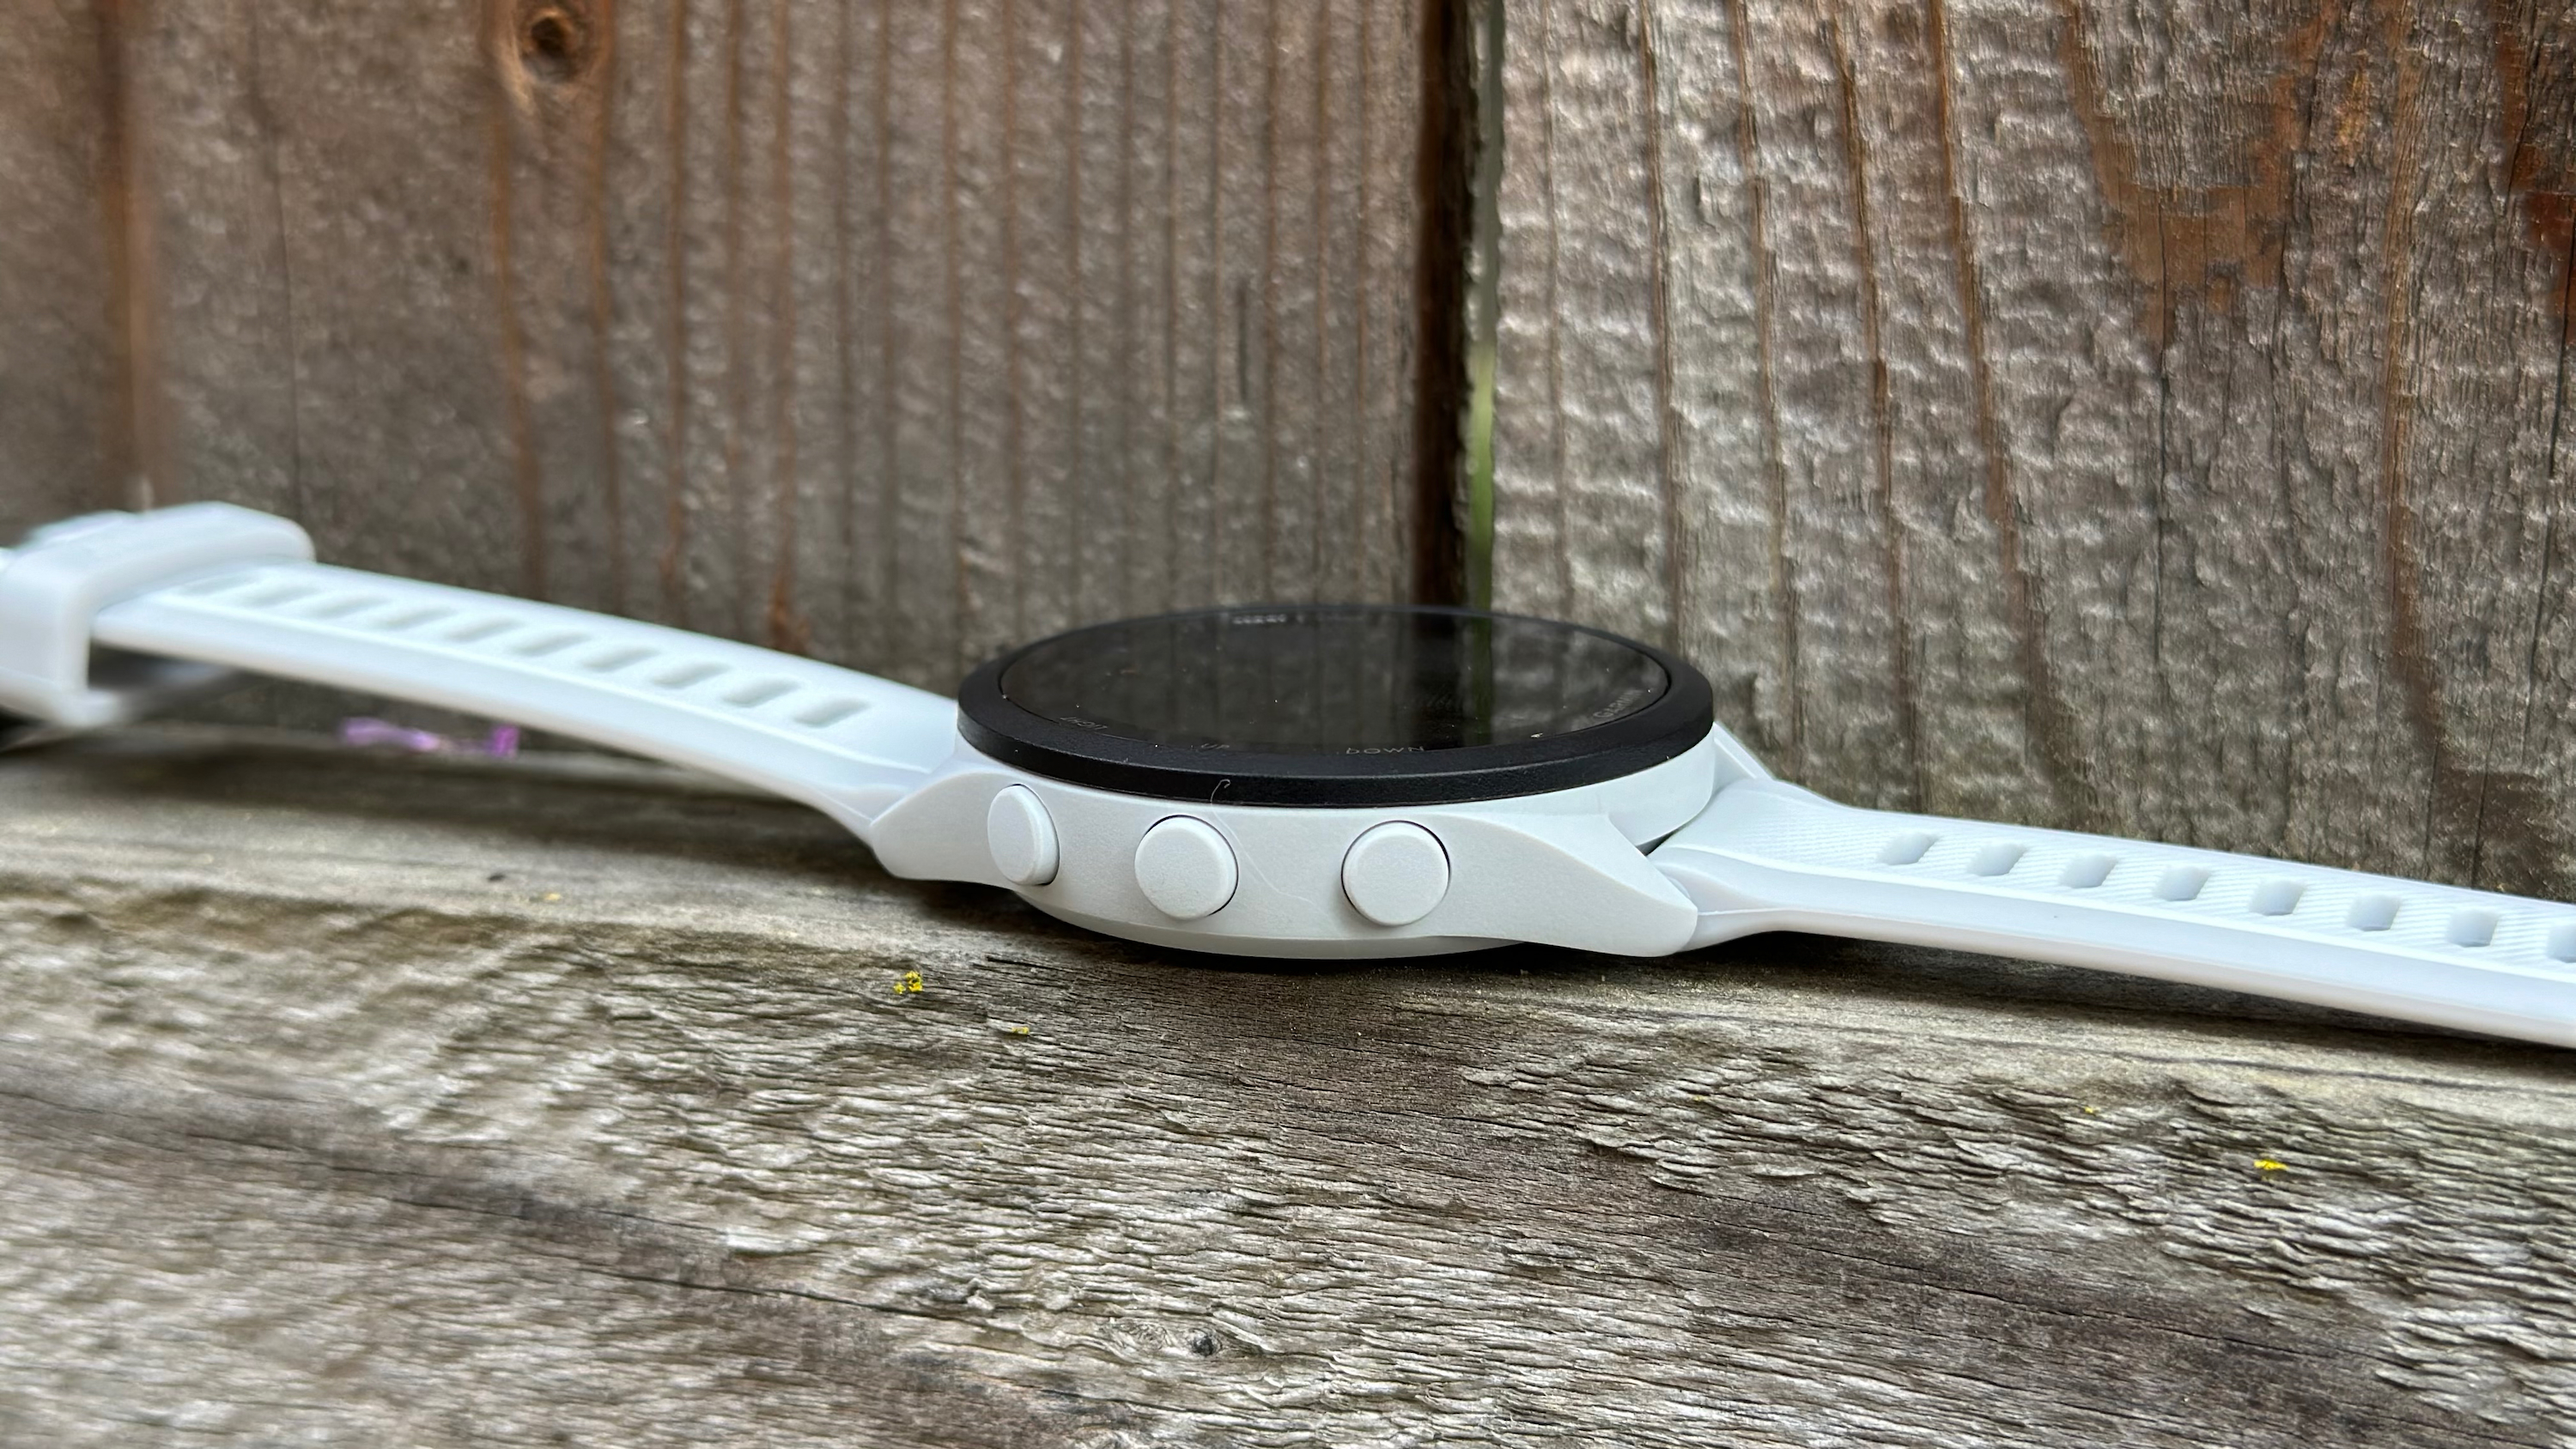 A side view of the three buttons and plastic-looking design of the Garmin Forerunner 165.